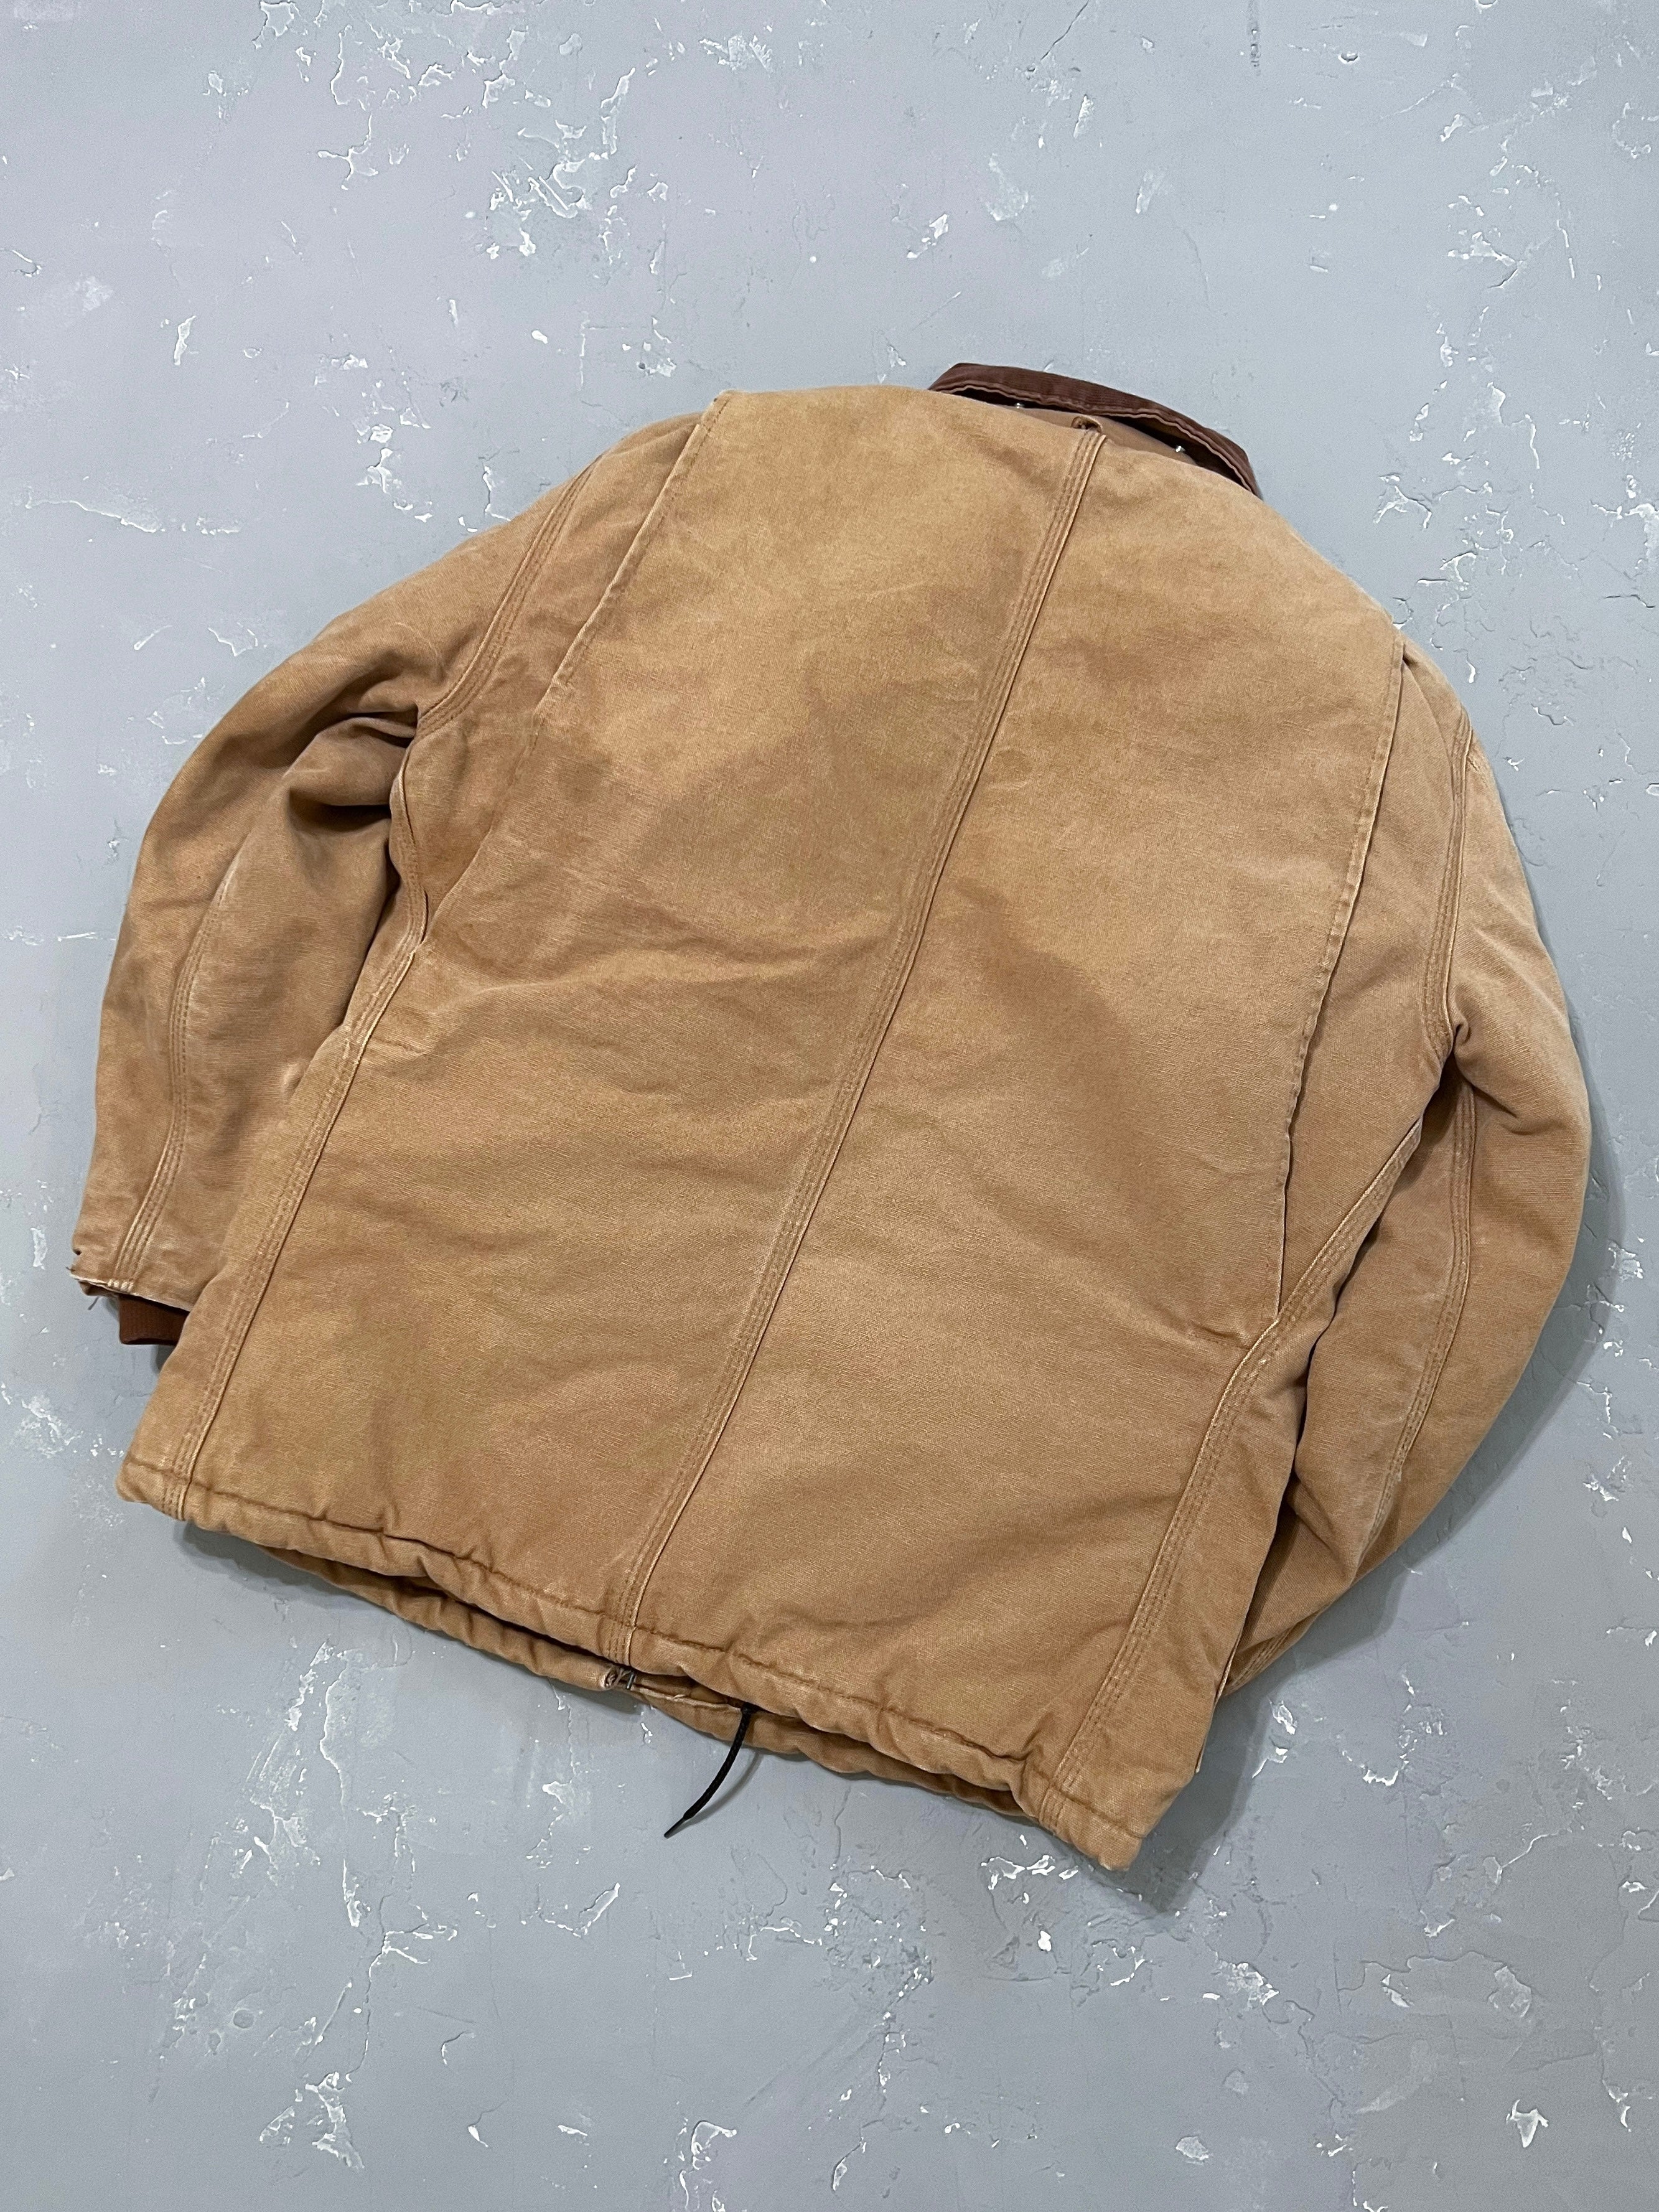 1980s Carhartt Quilt Lined Arctic Jacket [M]